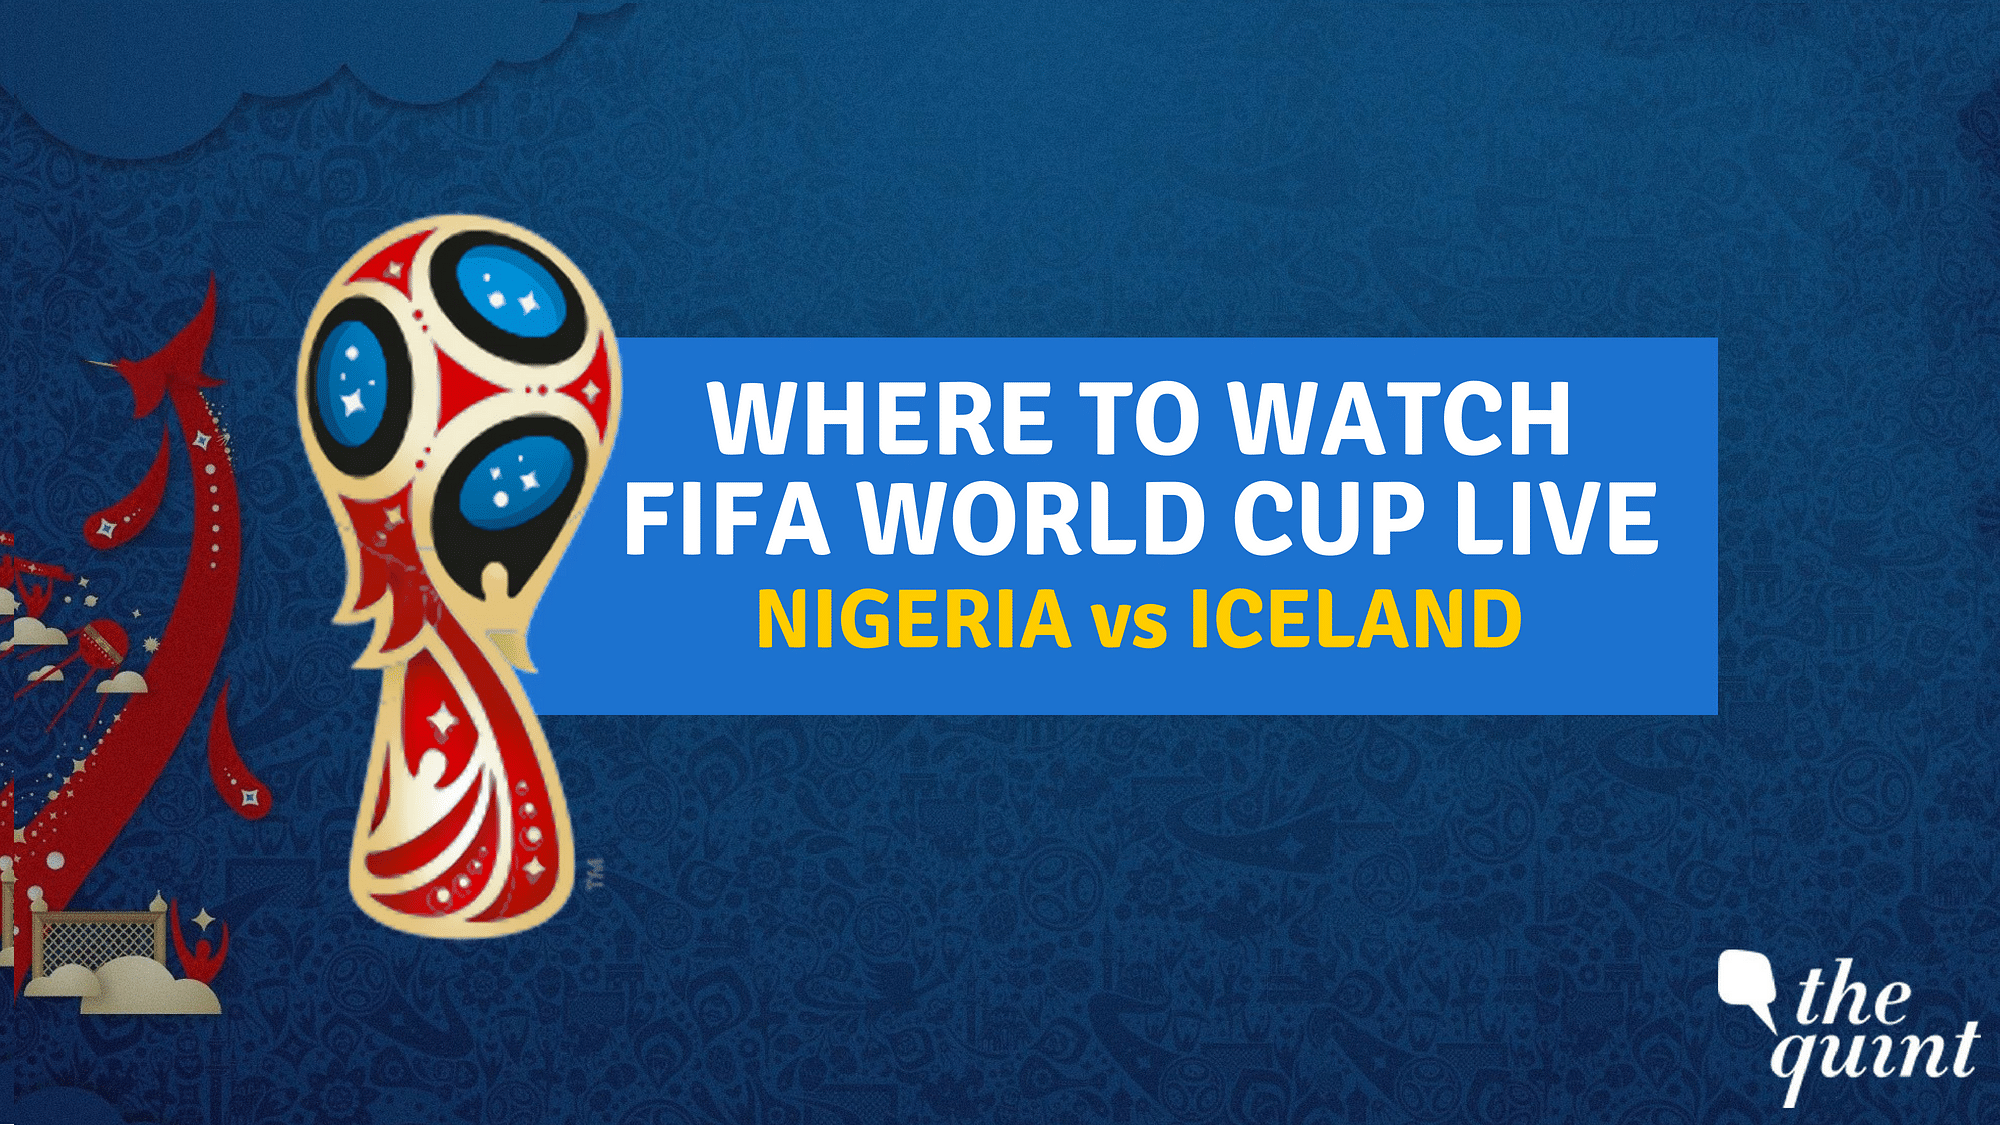 Nigeria vs Iceland, FIFA World Cup 2018 Match will be played on 22 June.